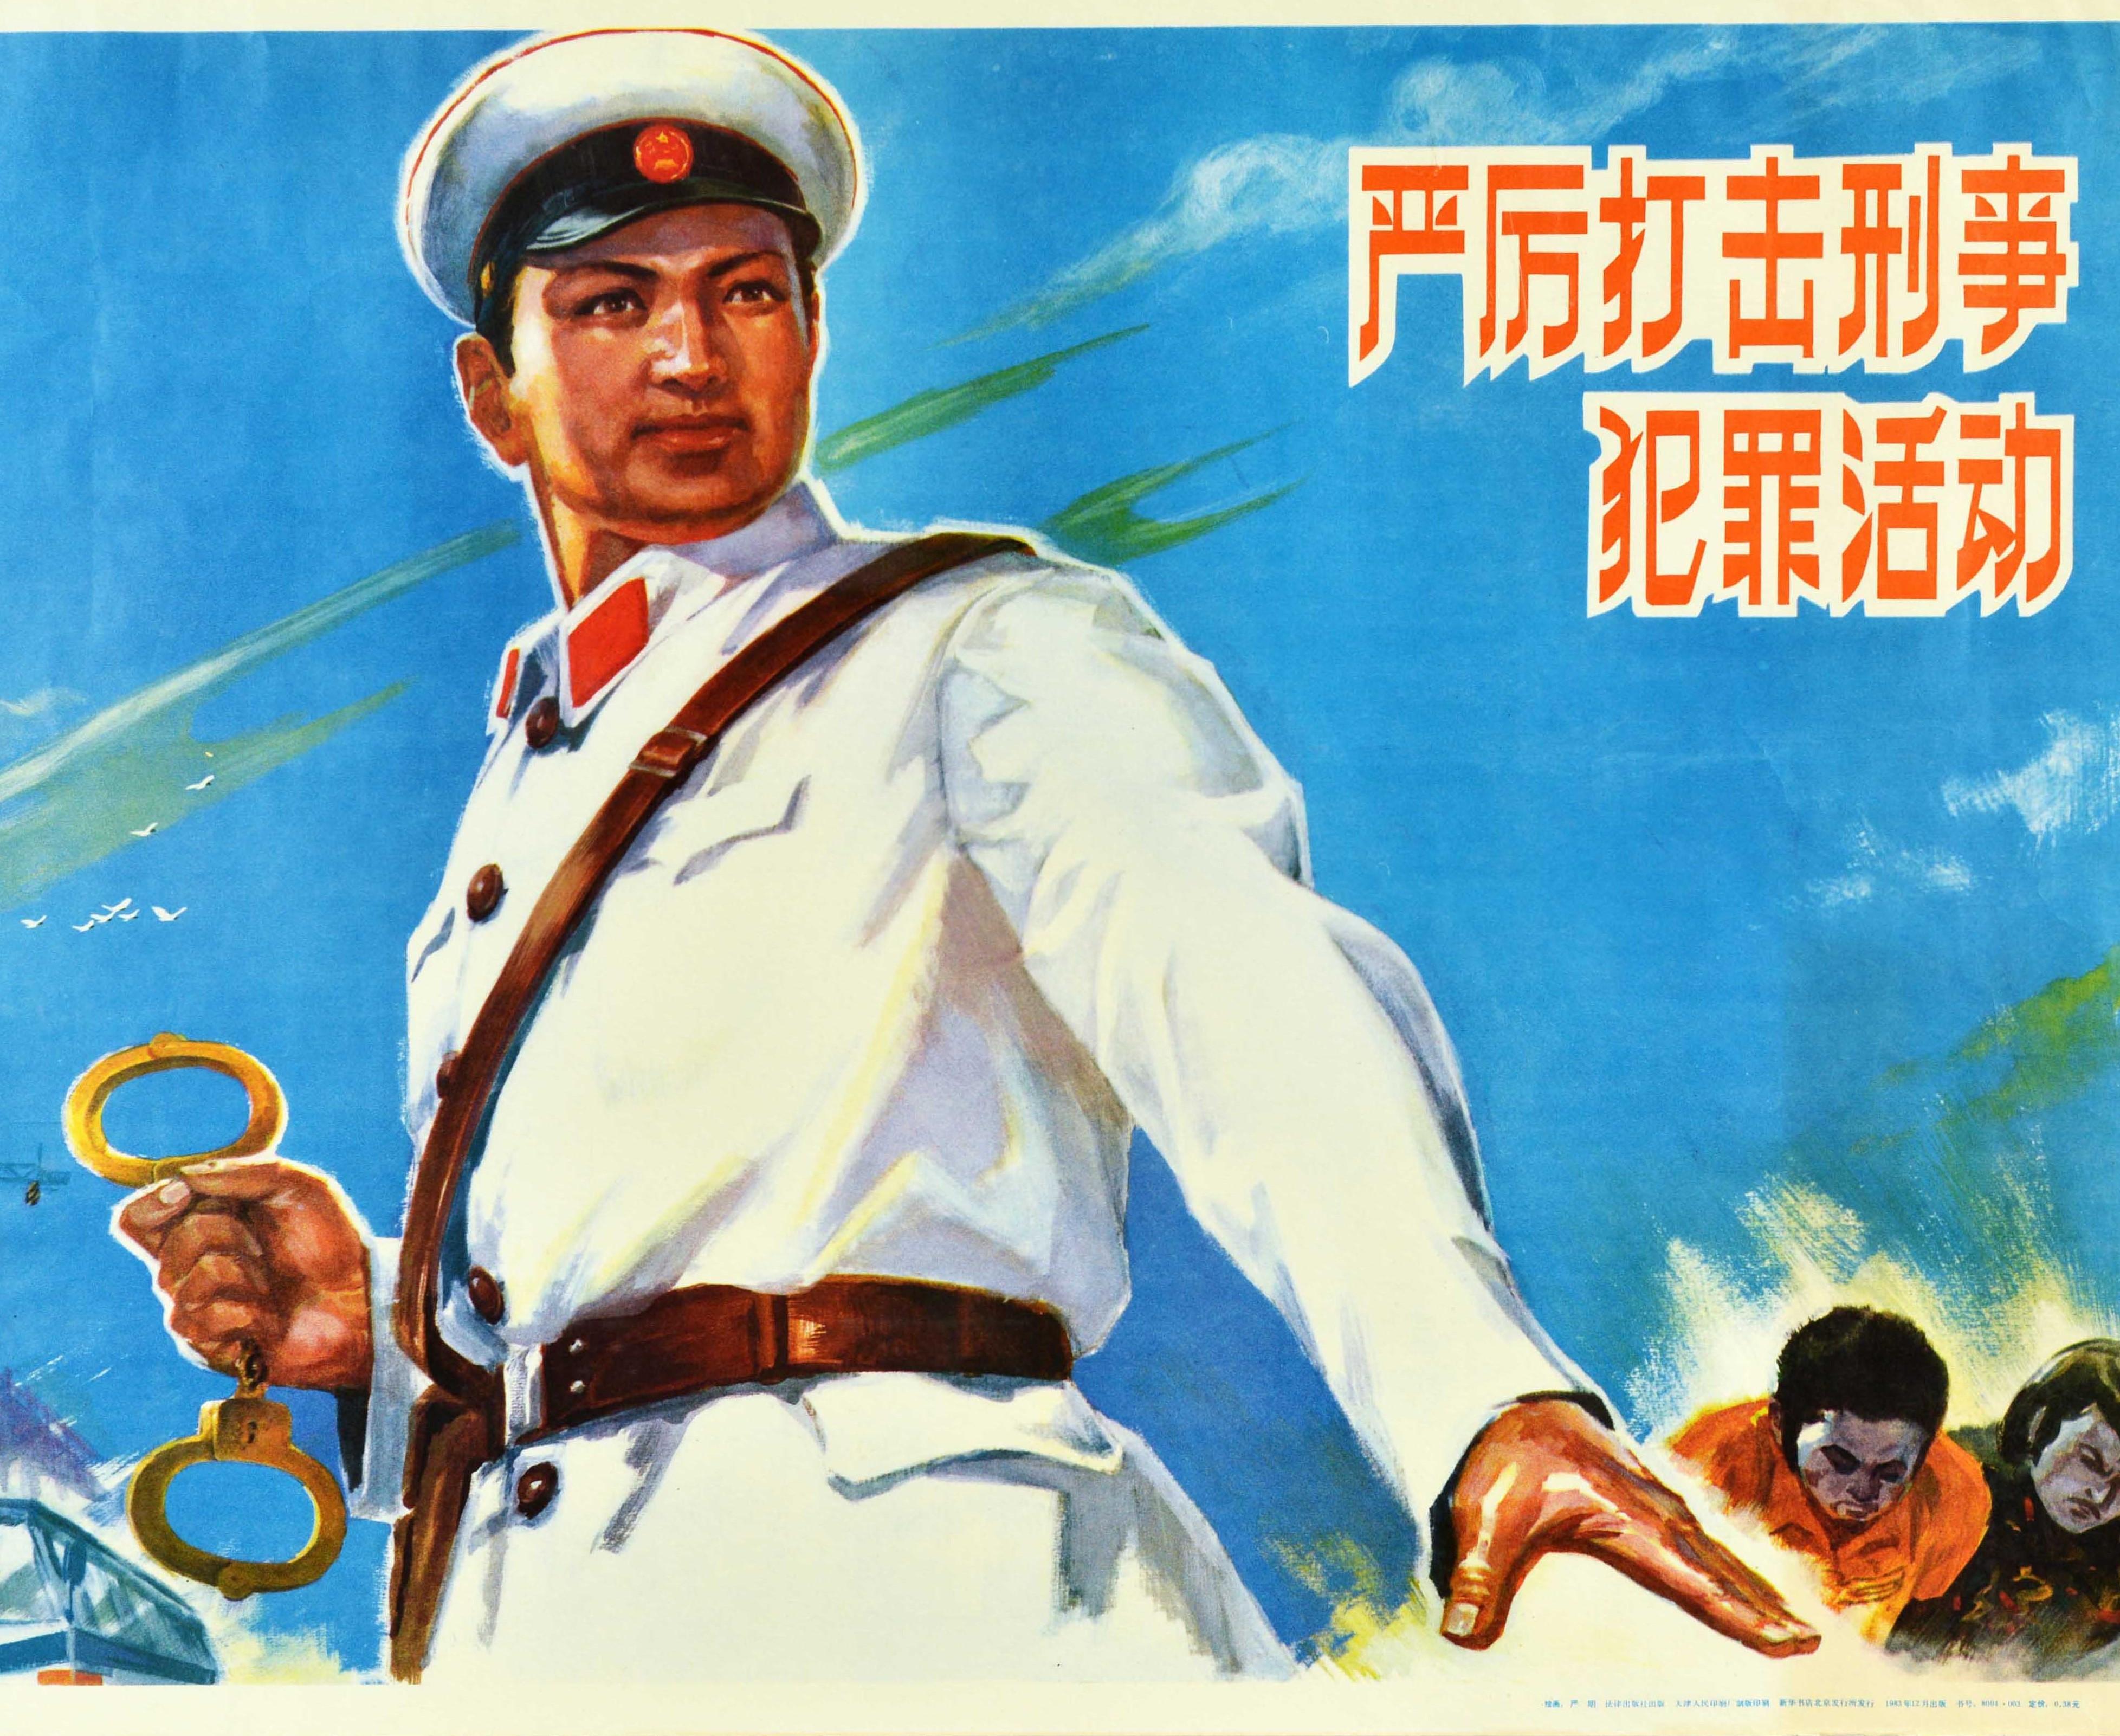 Original vintage Chinese propaganda poster - Severely crackdown on criminal activities / ?????????? - featuring an illustration of a police officer in uniform holding handcuffs with a police car and two criminals in the background. Published by Law